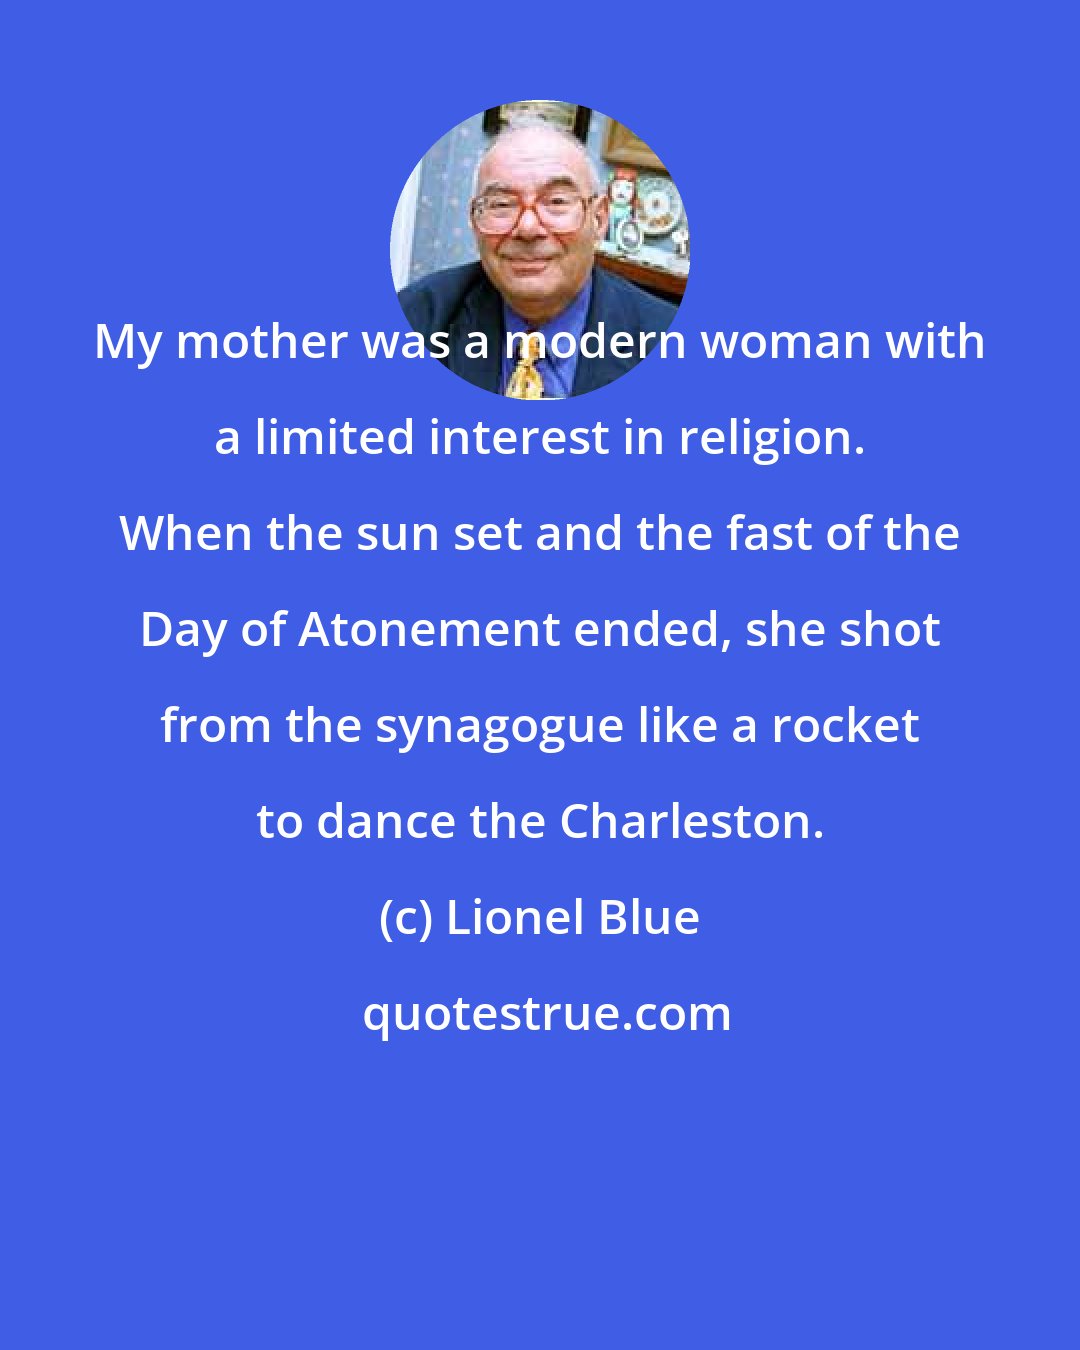 Lionel Blue: My mother was a modern woman with a limited interest in religion. When the sun set and the fast of the Day of Atonement ended, she shot from the synagogue like a rocket to dance the Charleston.